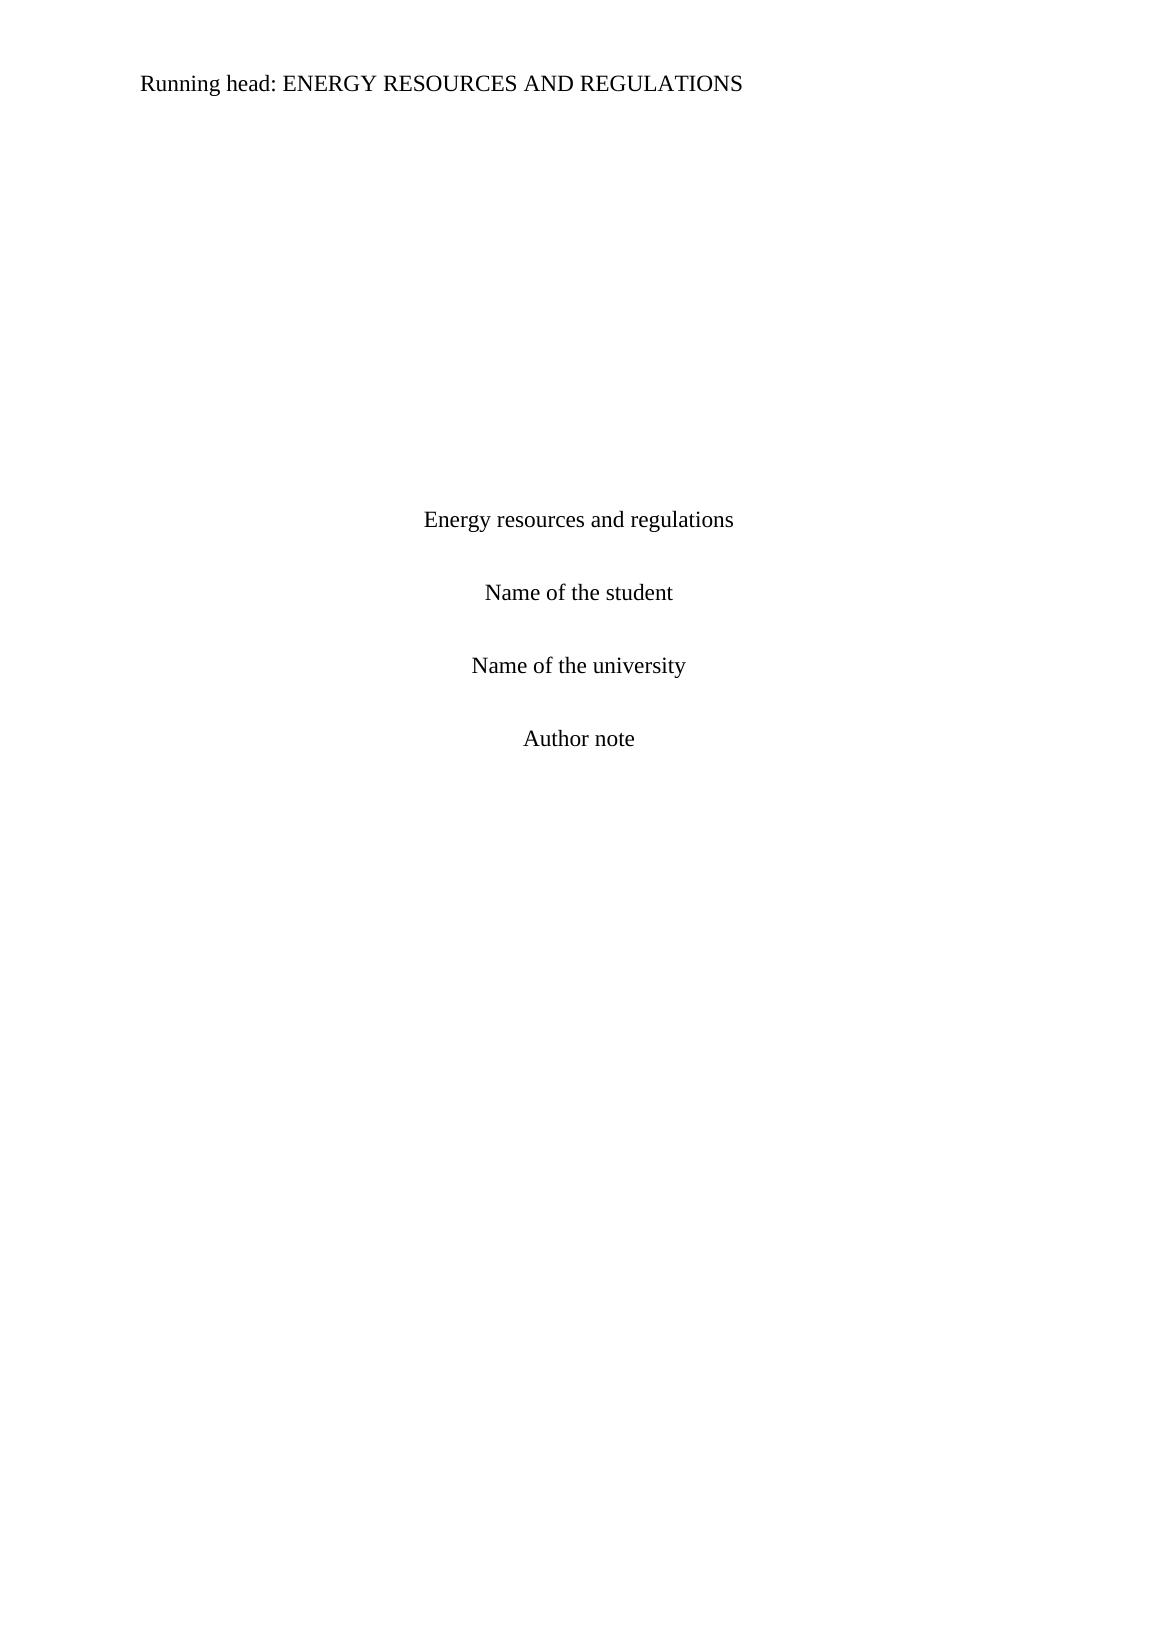 Energy Resources and Regulations - Assignment_1